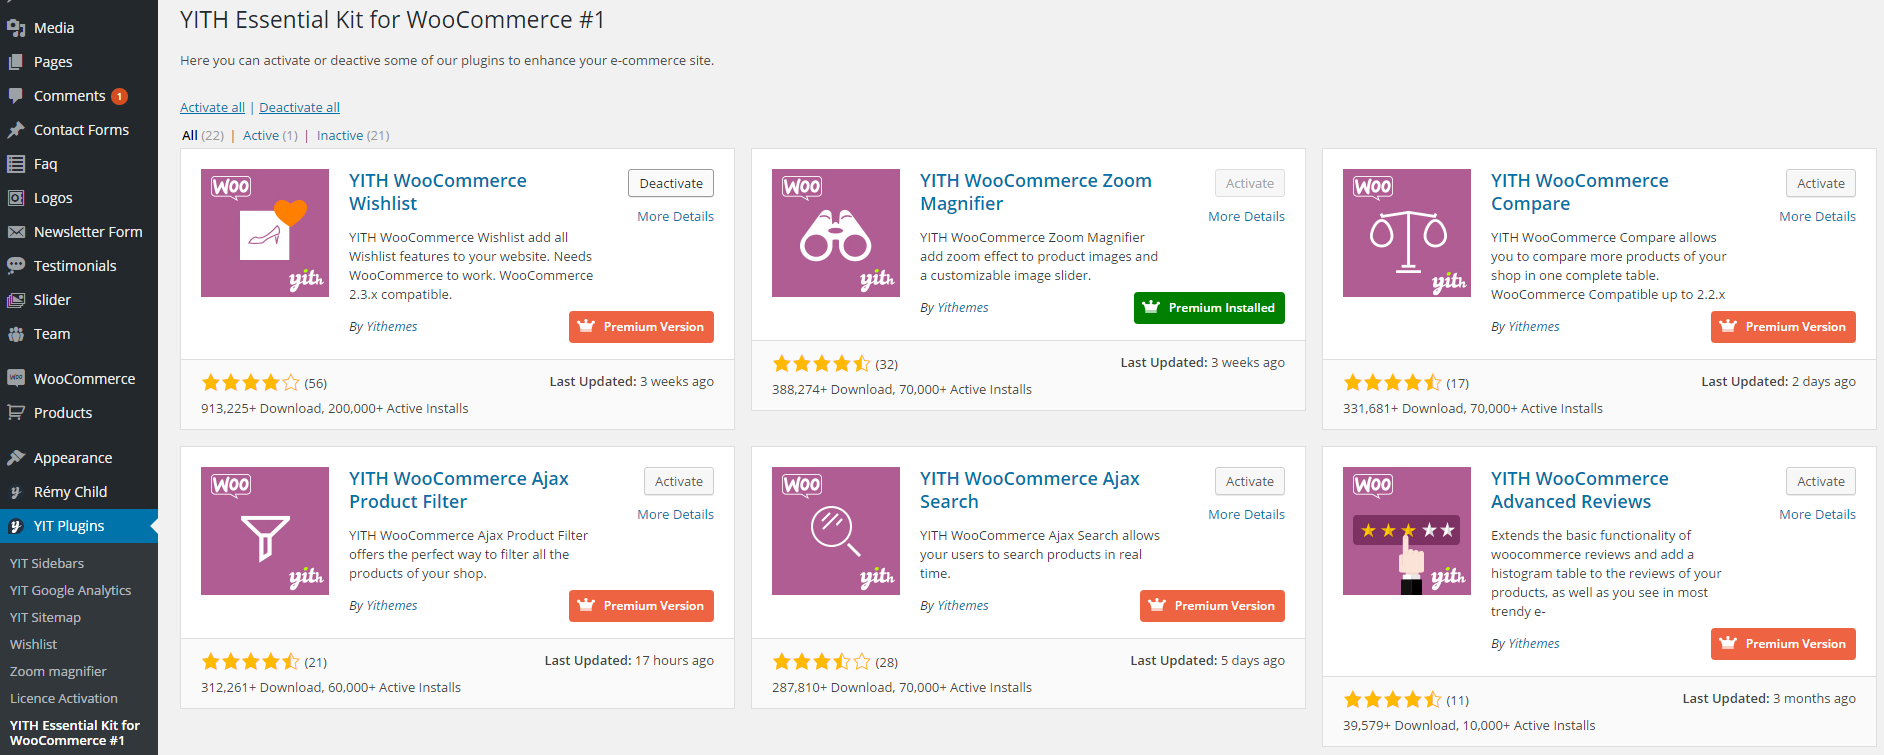 YITH Essential Kit for WooCommerce #1 Download Free Wordpress Plugin 5